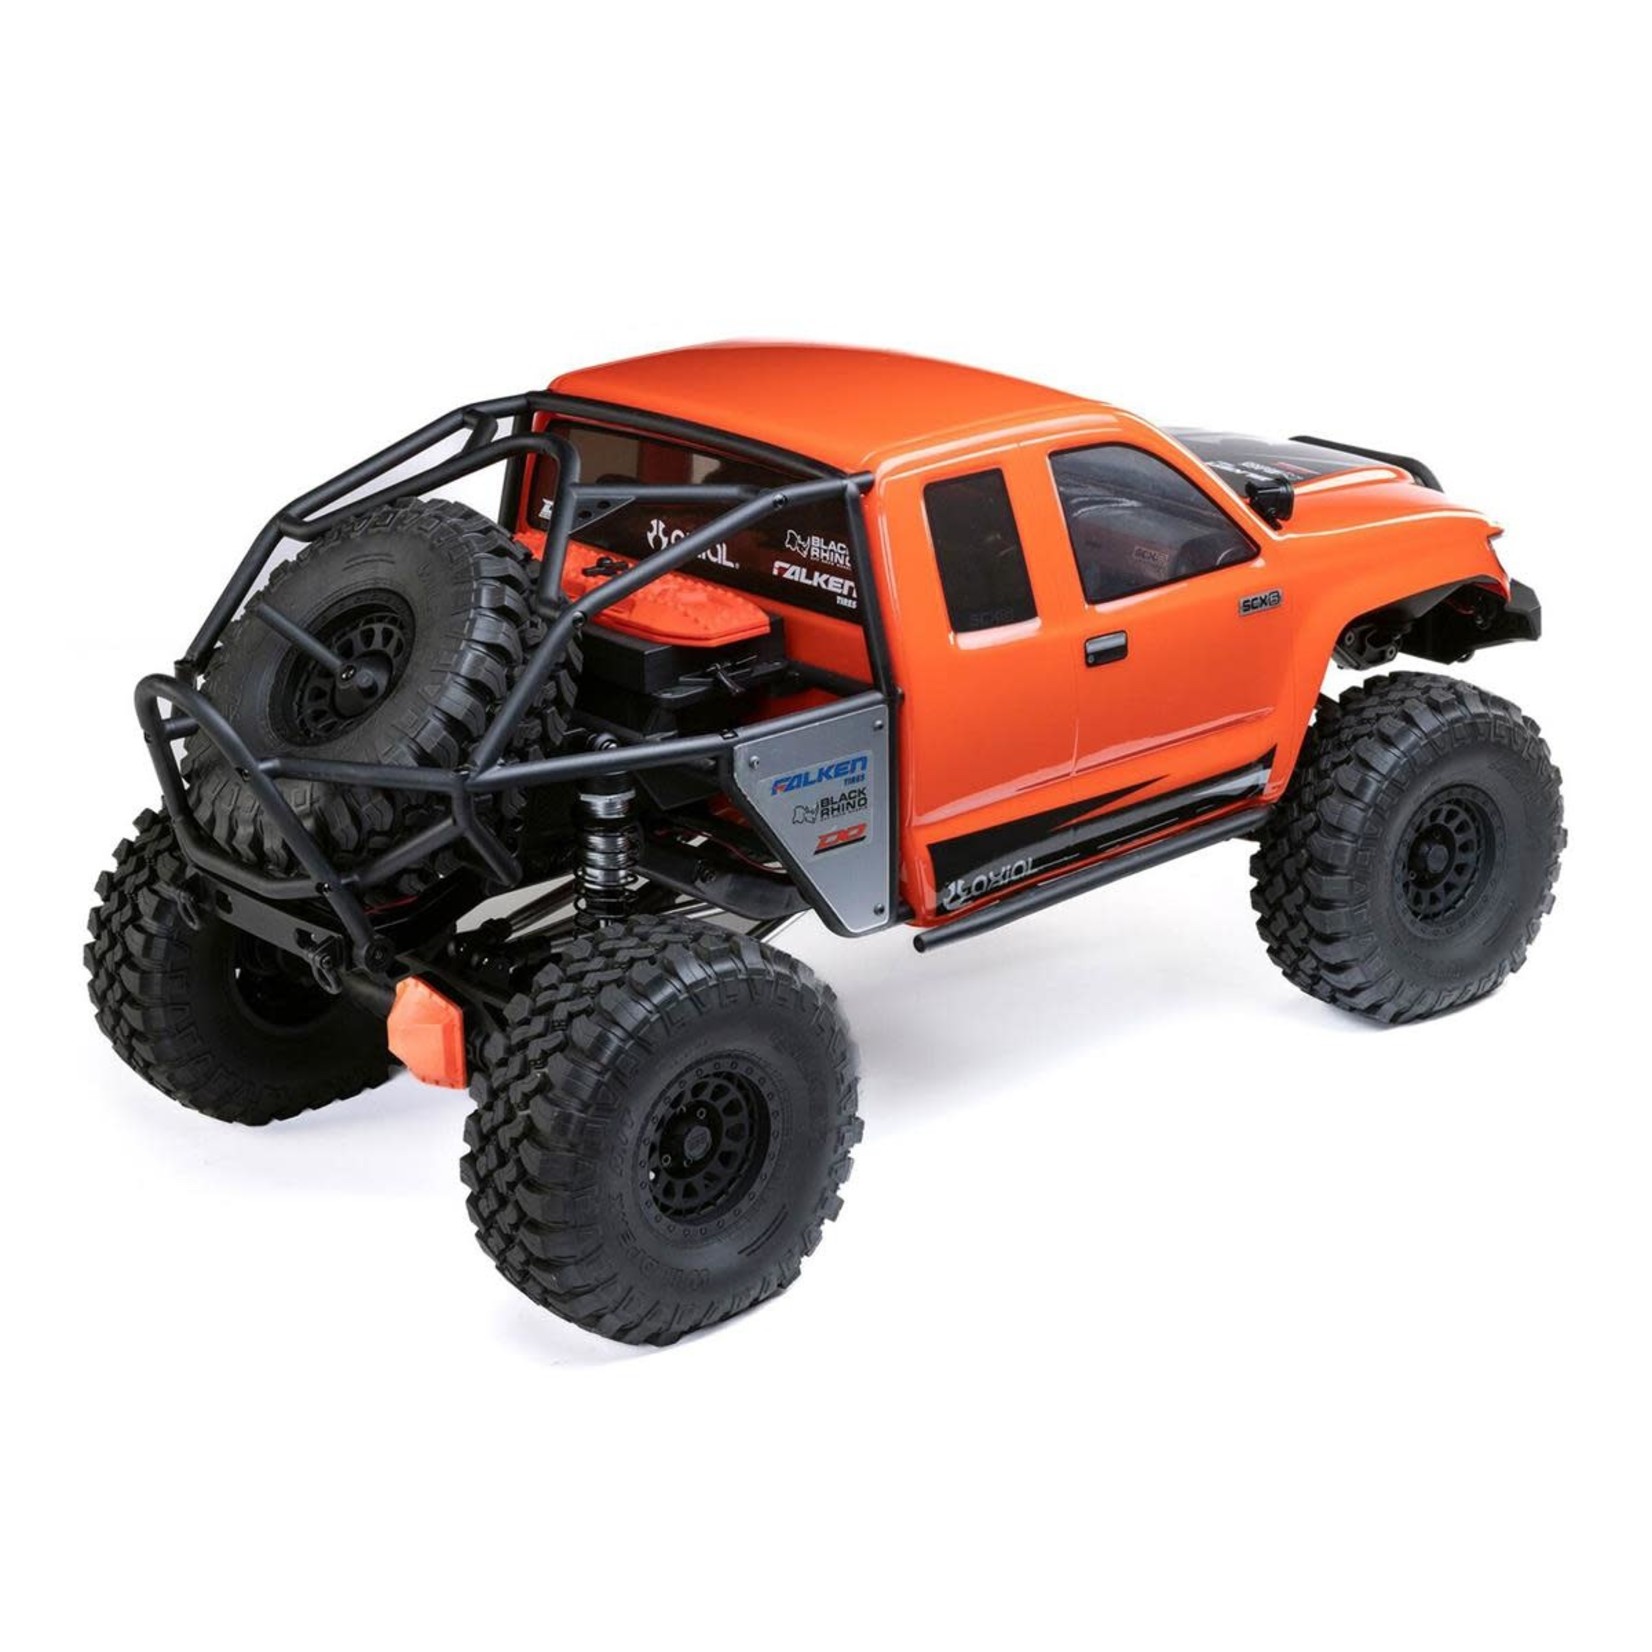 Axial Axial SCX6 Trail Honcho 1/6 4WD RTR Electric Rock Crawler (Red) w/DX3 Radio & Smart ESC #AXI05001T1